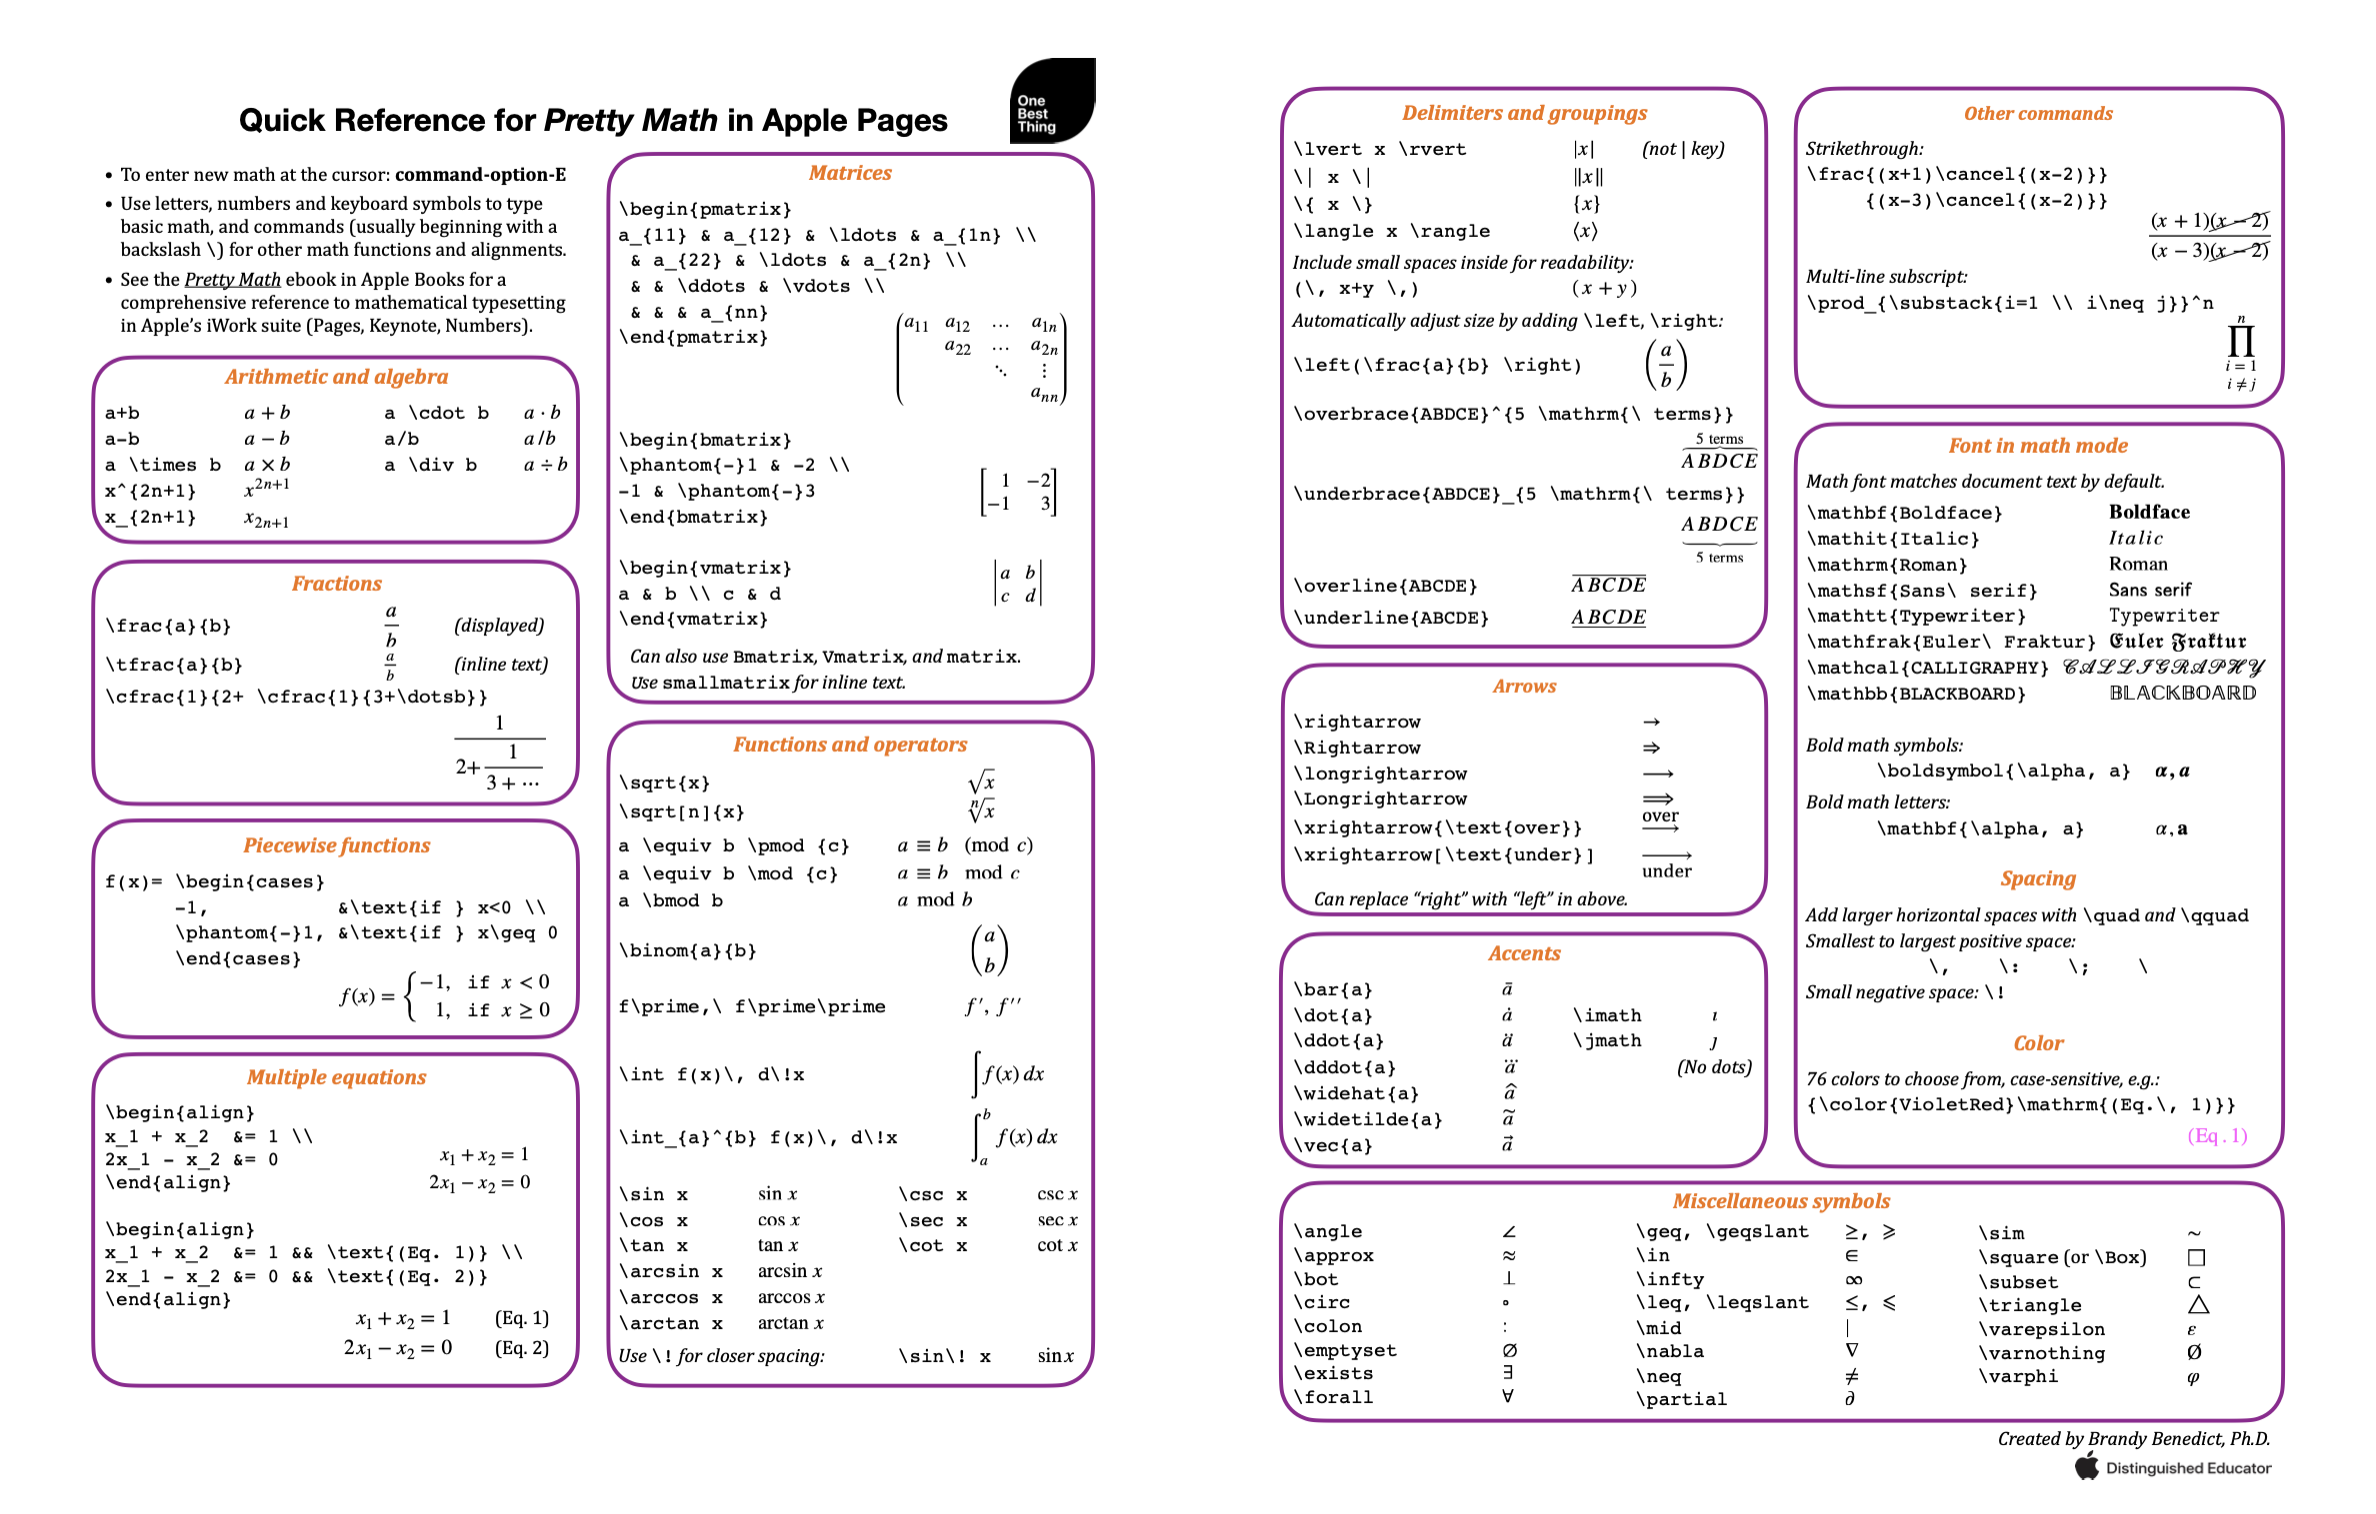 Image shows the two pages of the Quick Reference for Pretty Math resource.